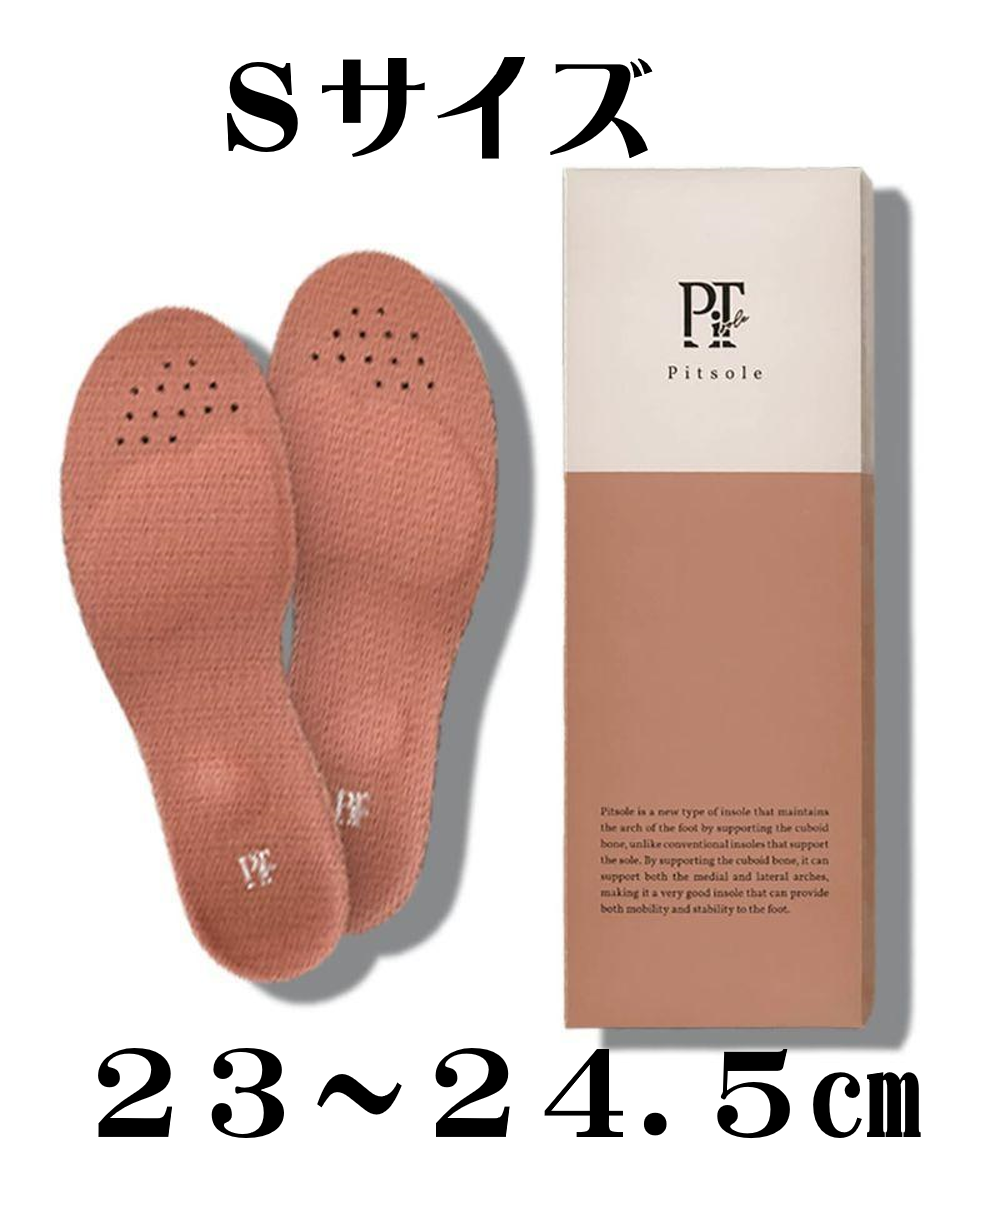 Pitsolepito sole middle bed beautiful legs posture support beautiful posture insole man and woman use .. work charge reduction arch support size adjustment insole 